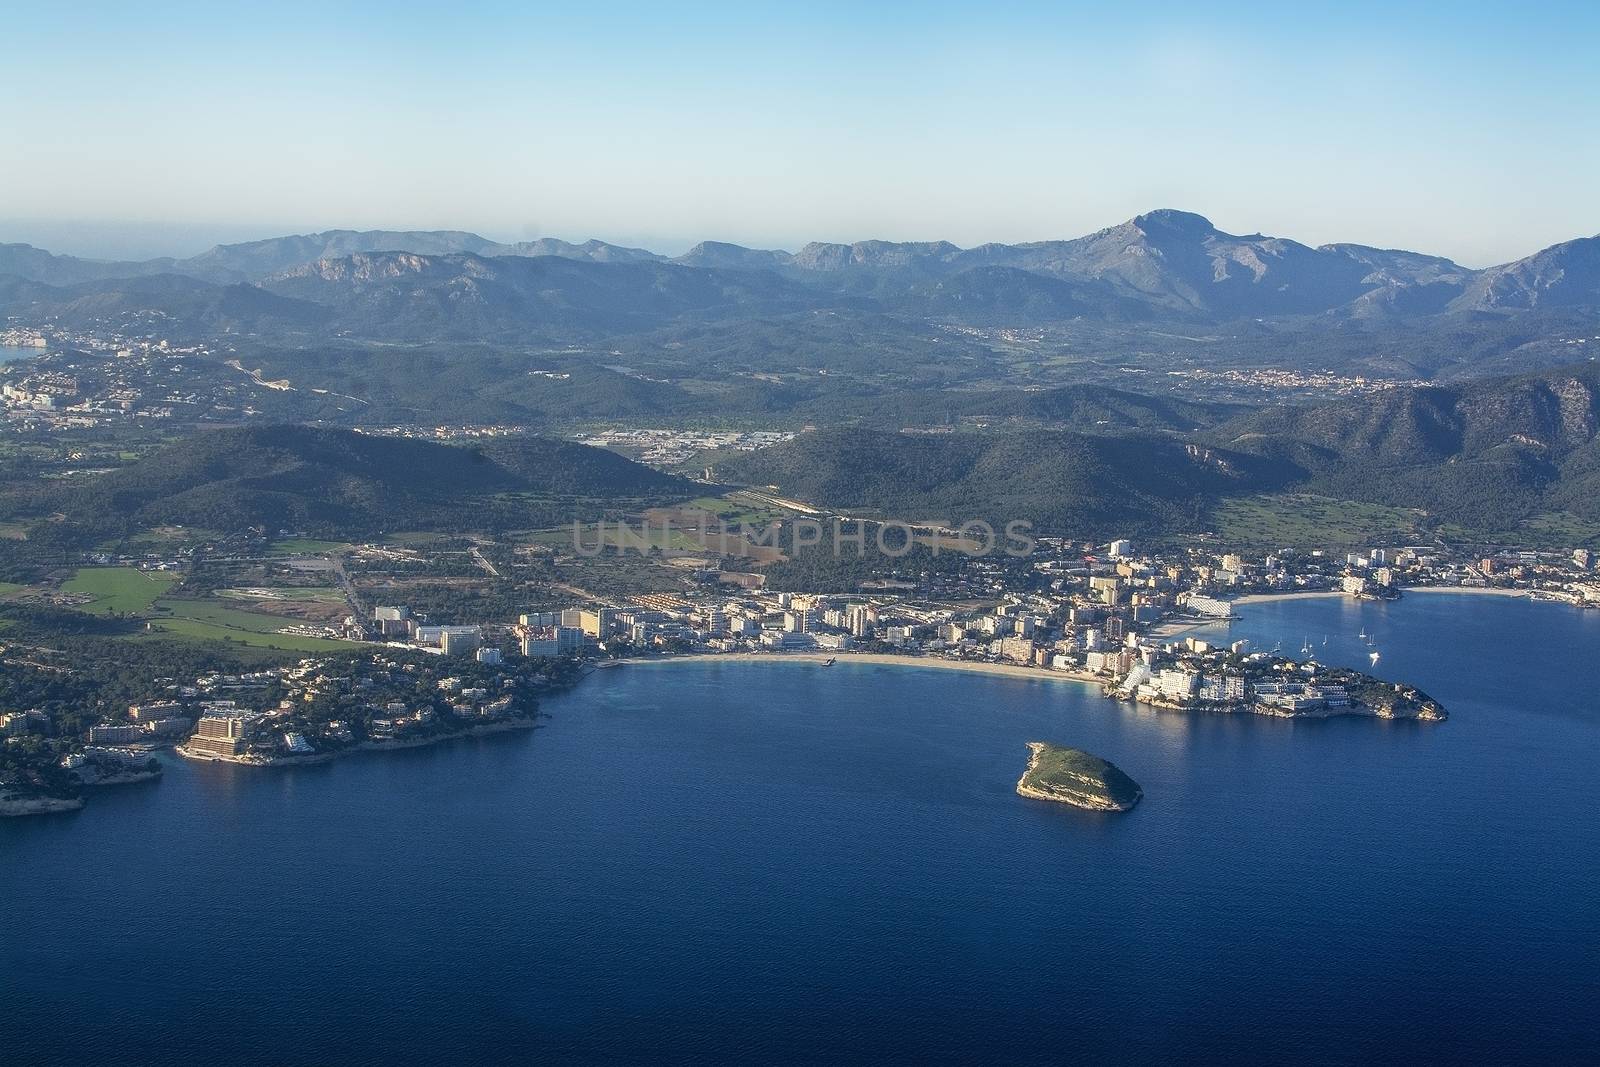 Coastal landscape aerial view on a sunny afternoon in Palma bay, Mallorca, Spain